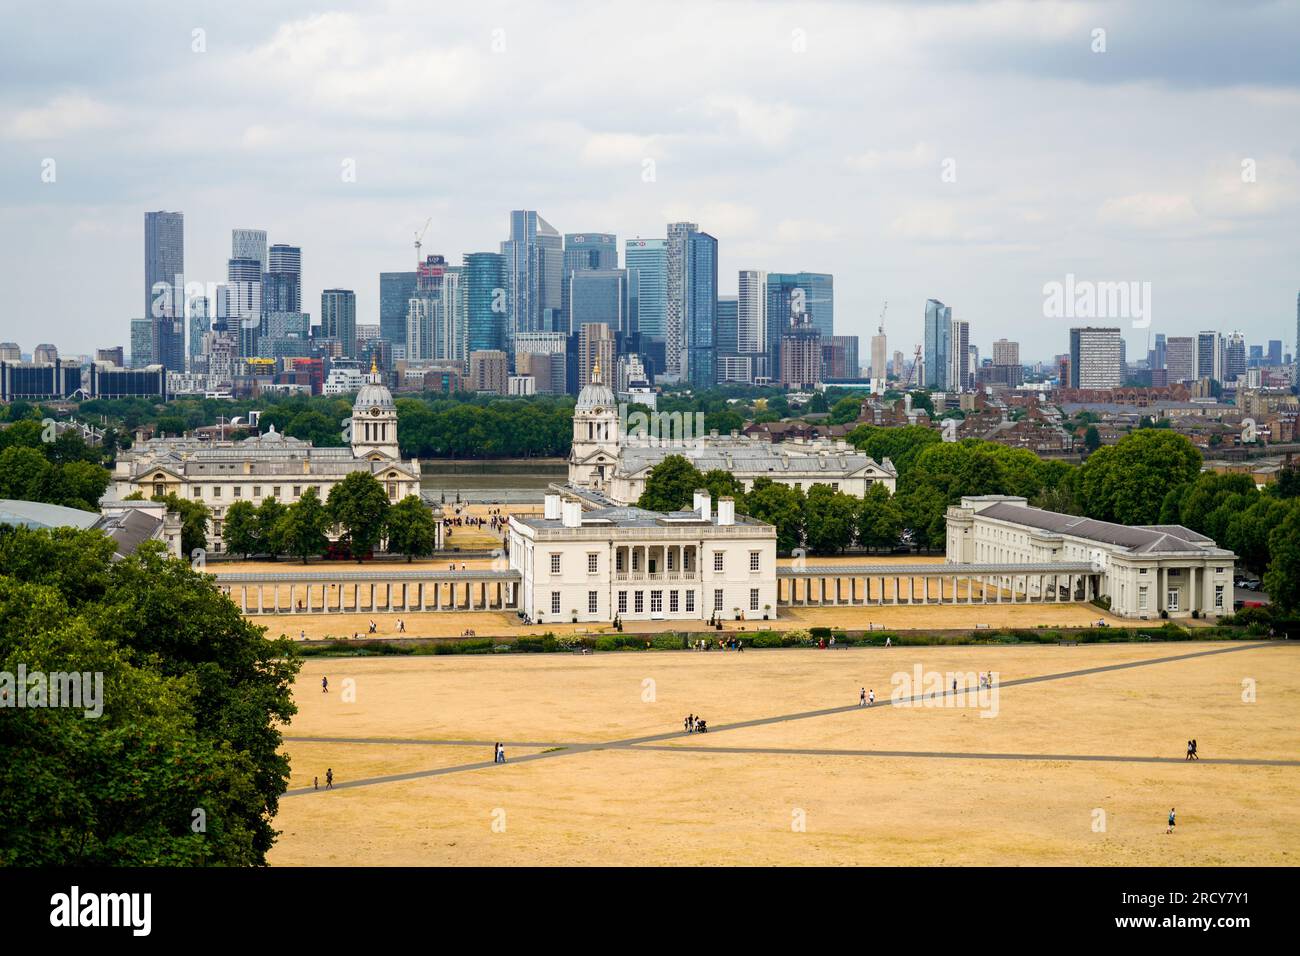 Greenwich cityscape. Historic London borough, located on the Thames river and home to the Royal Observatory, Old Royal Naval College, Maritime Museum. Stock Photo